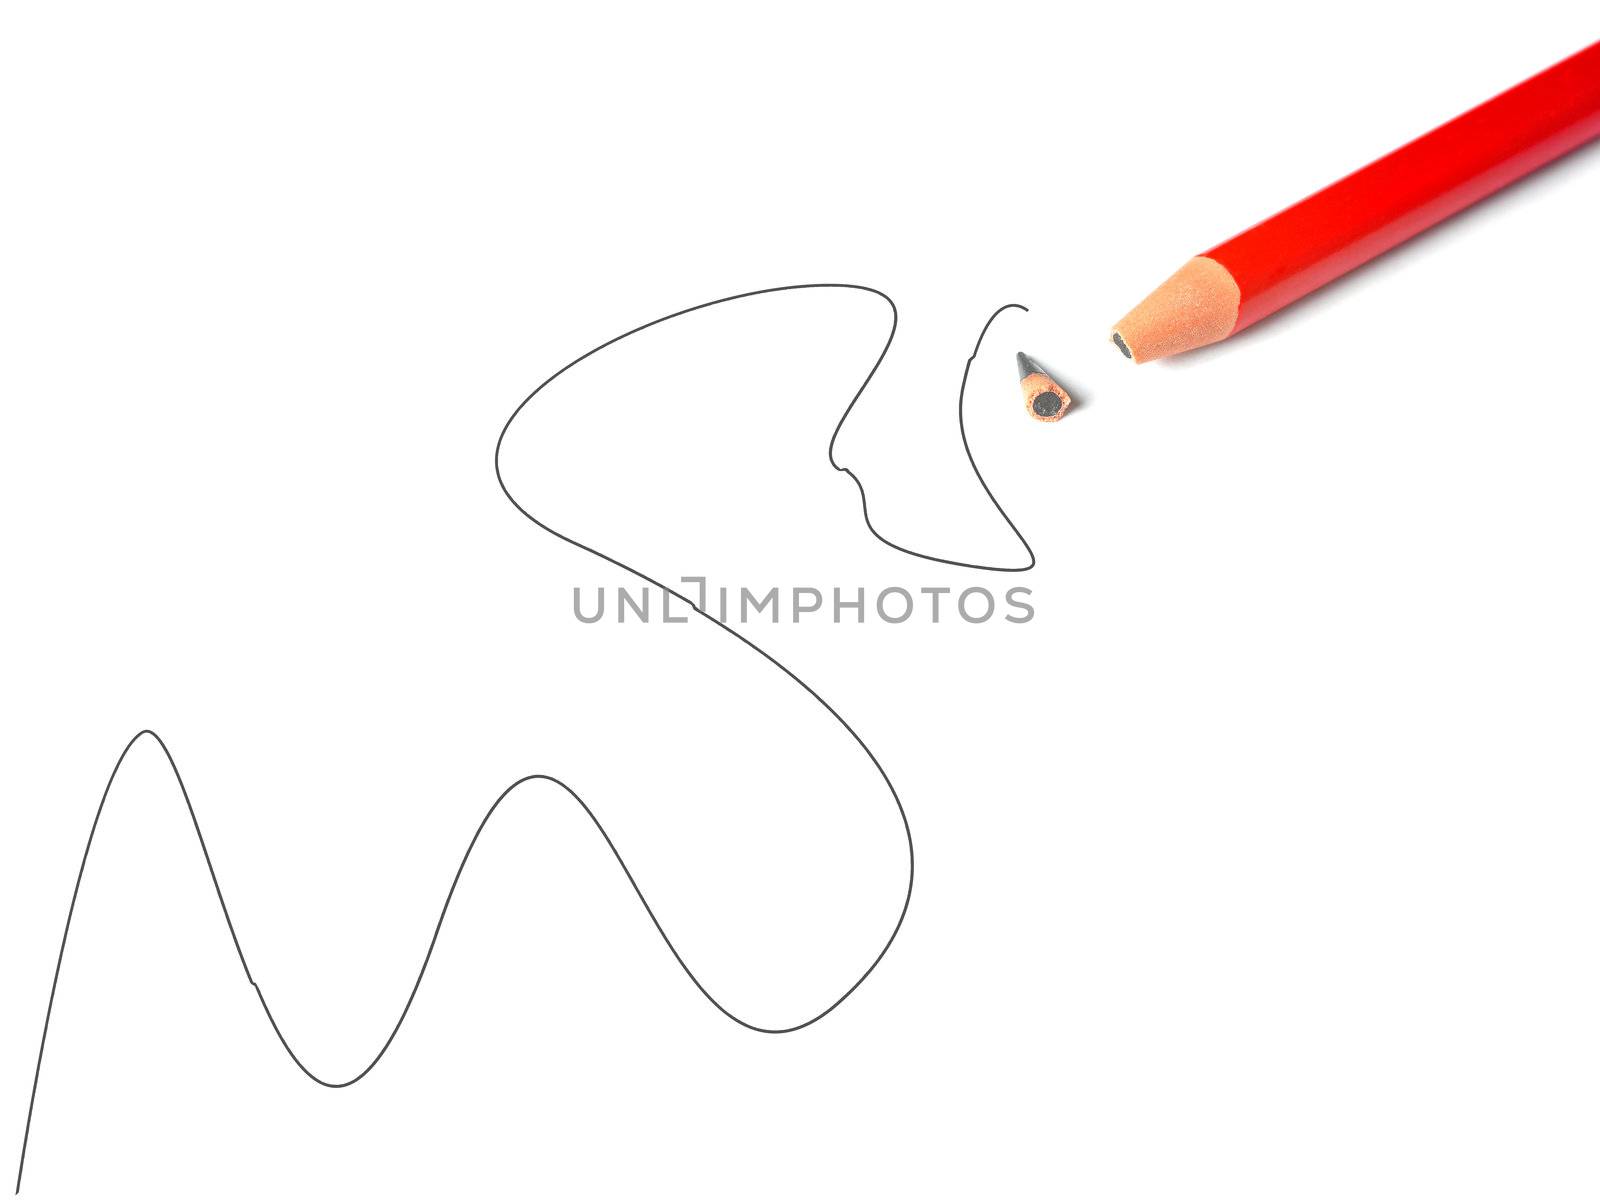 A broken pencil on a white piece of paper, with an erratic line drawn